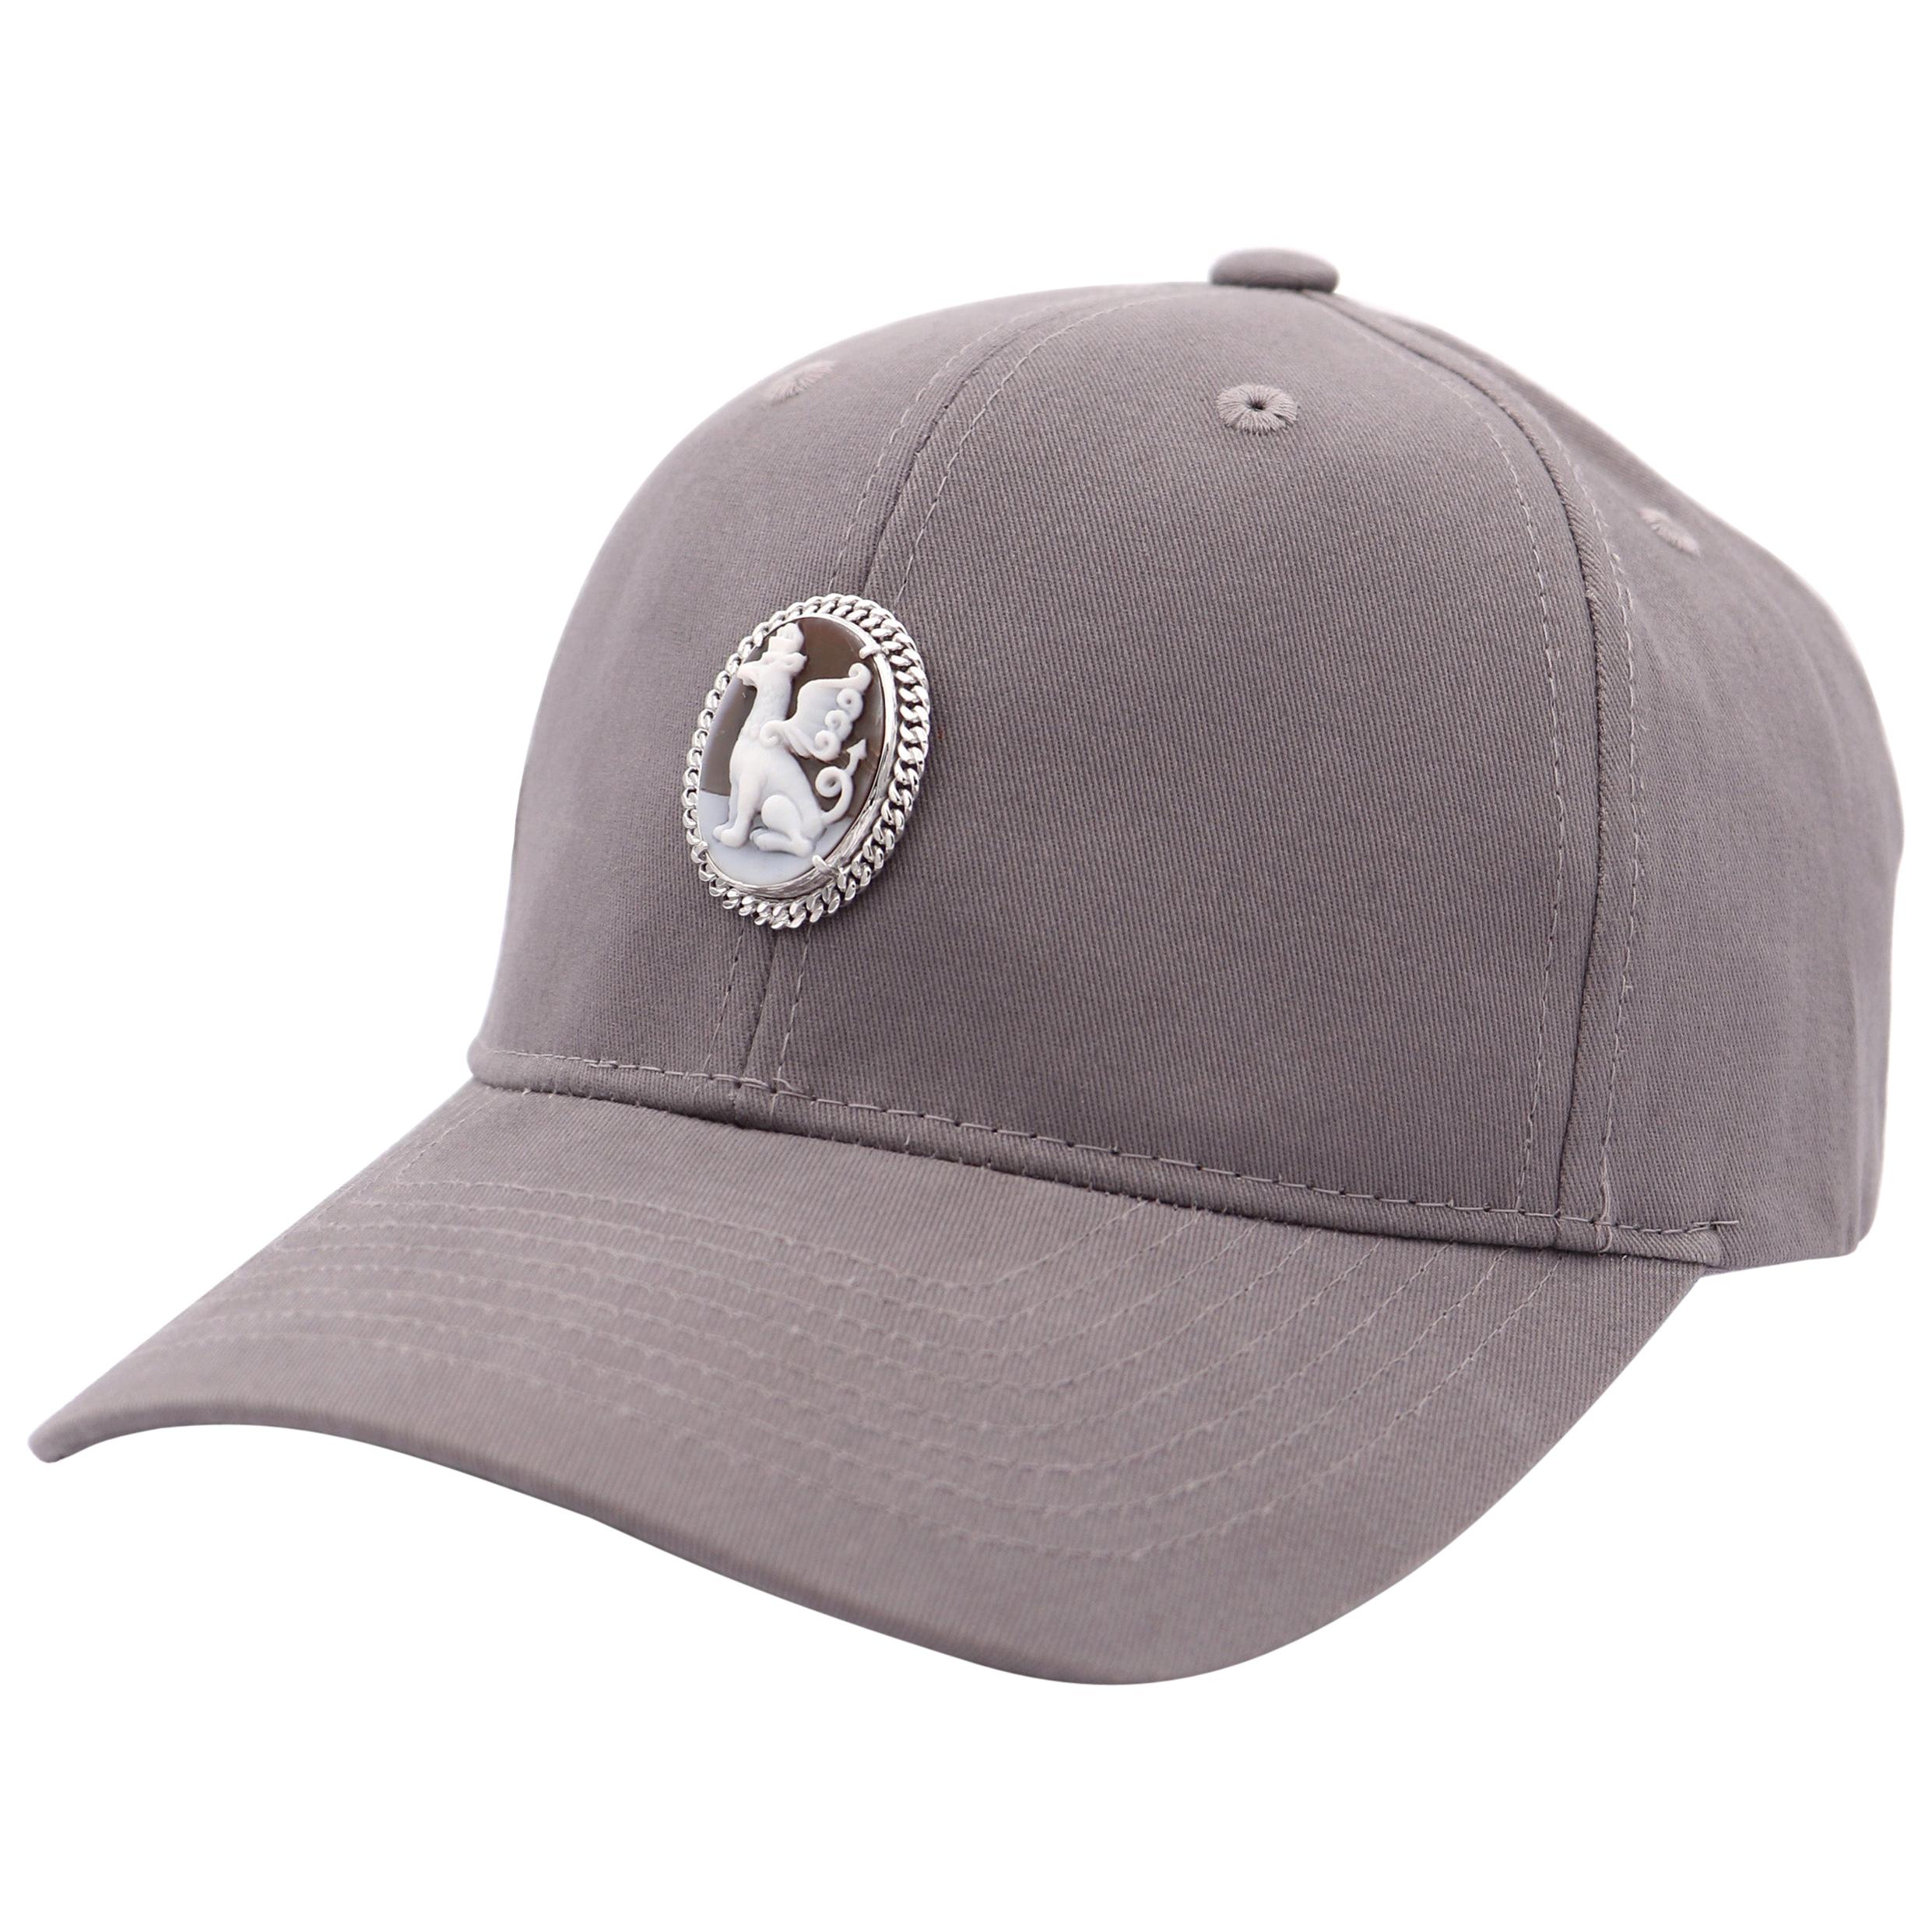 Amedeo "Griffin" Cameo Grey Cap For Sale